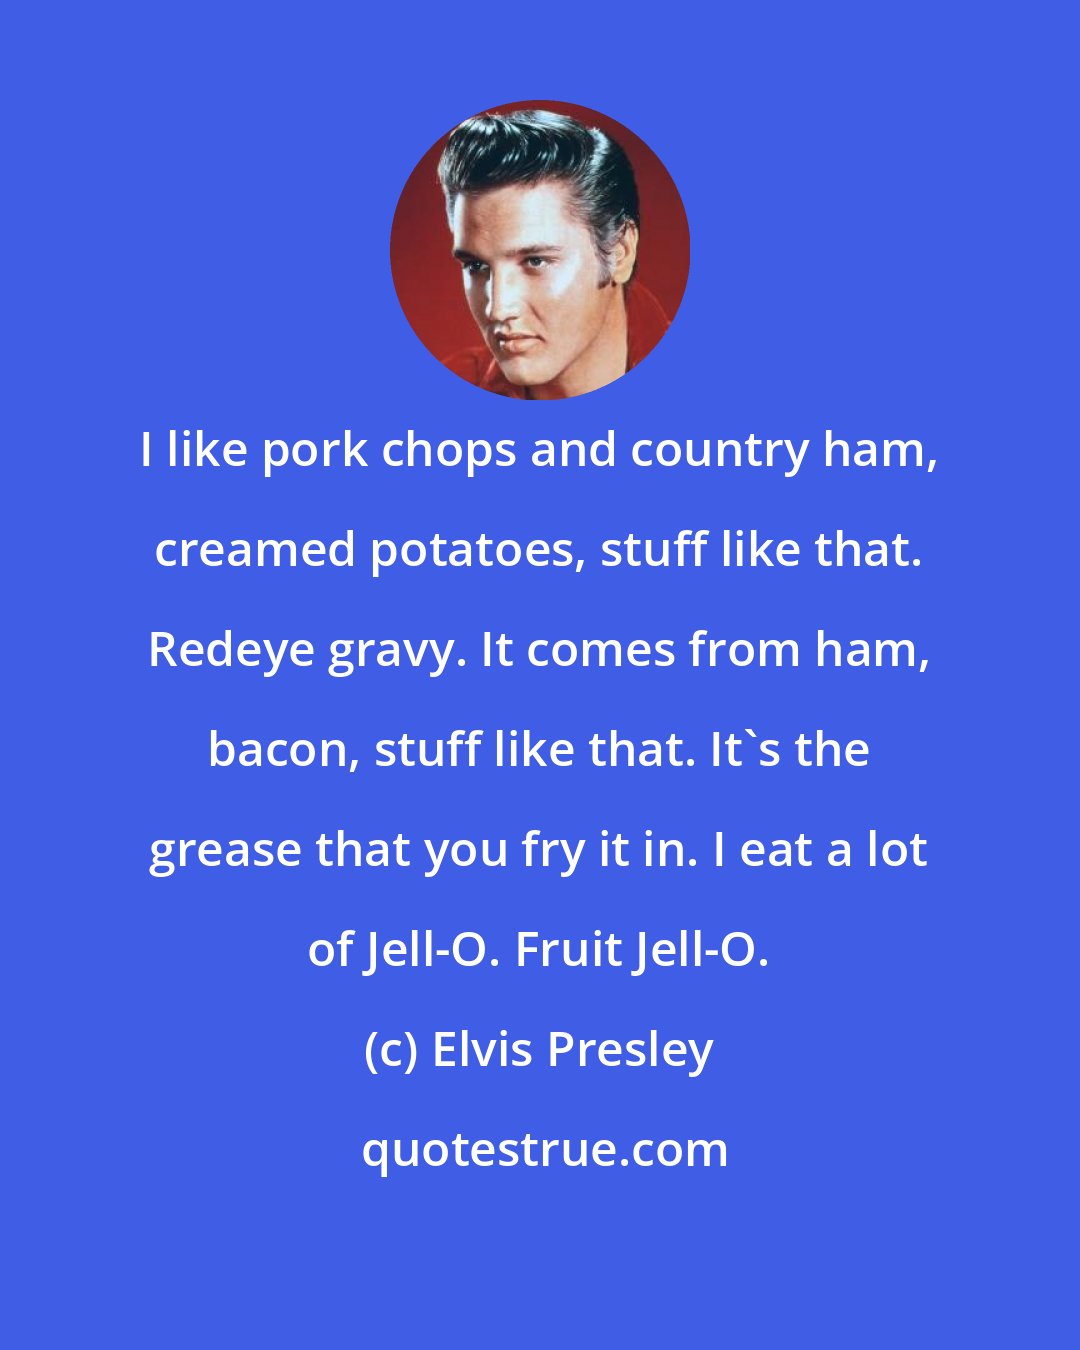 Elvis Presley: I like pork chops and country ham, creamed potatoes, stuff like that. Redeye gravy. It comes from ham, bacon, stuff like that. It's the grease that you fry it in. I eat a lot of Jell-O. Fruit Jell-O.